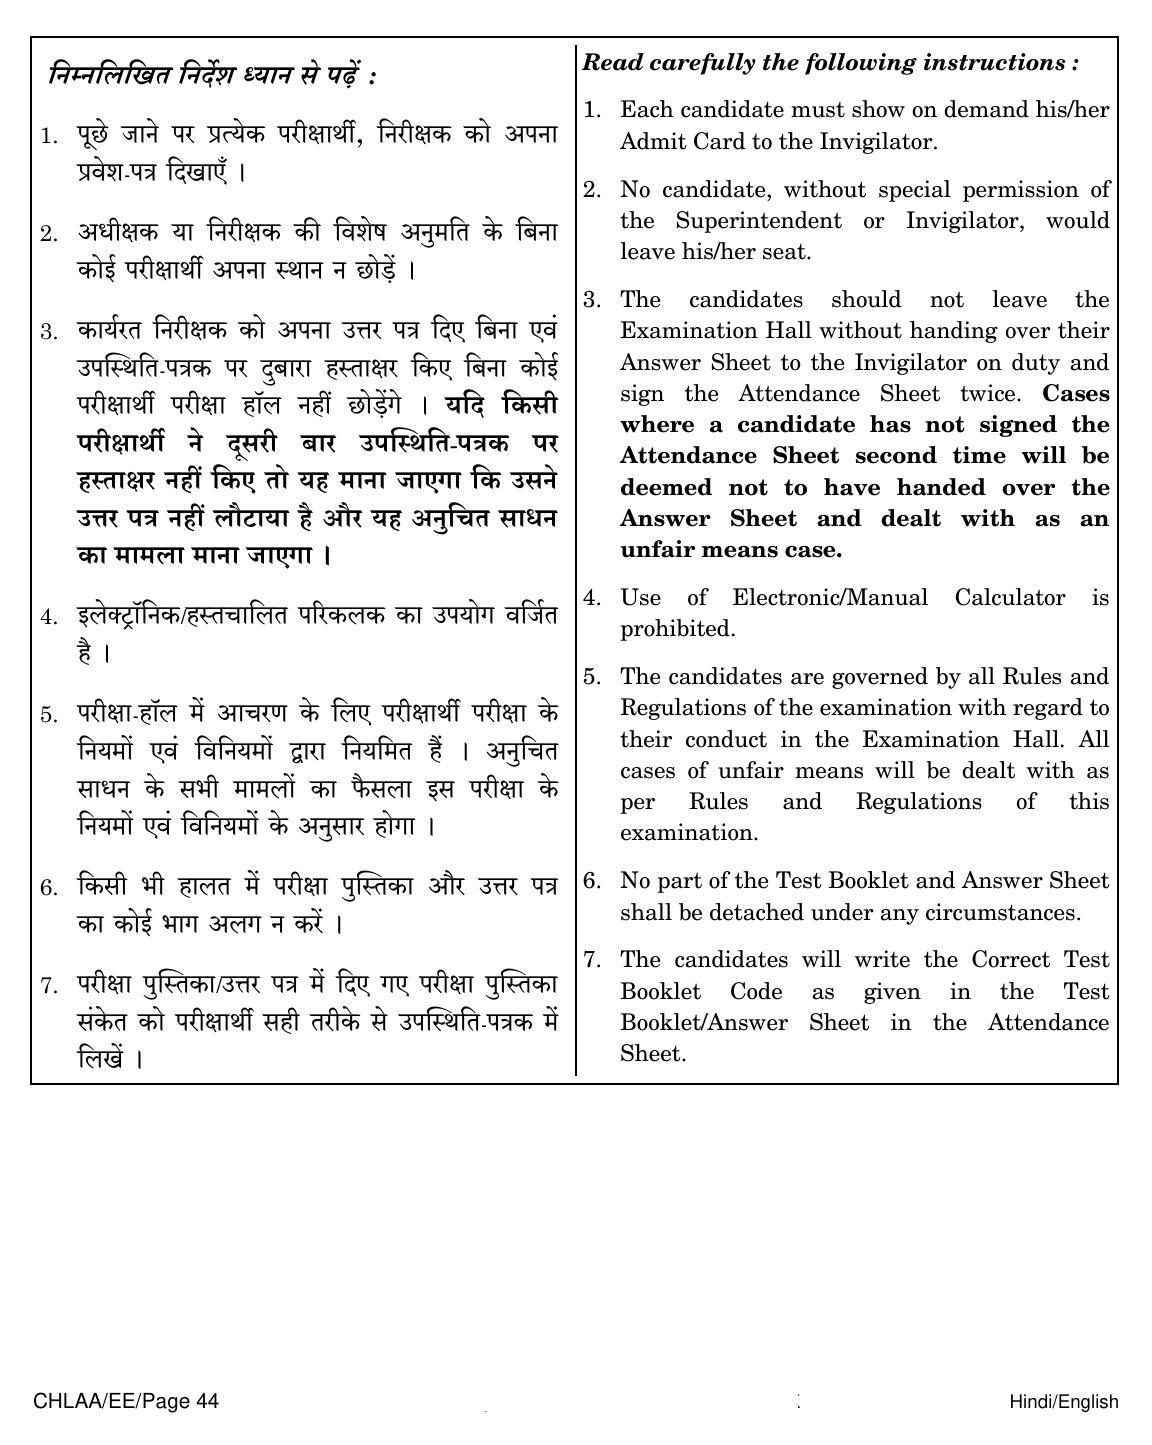 NEET Hindi EE 2018 Question Paper - Page 44